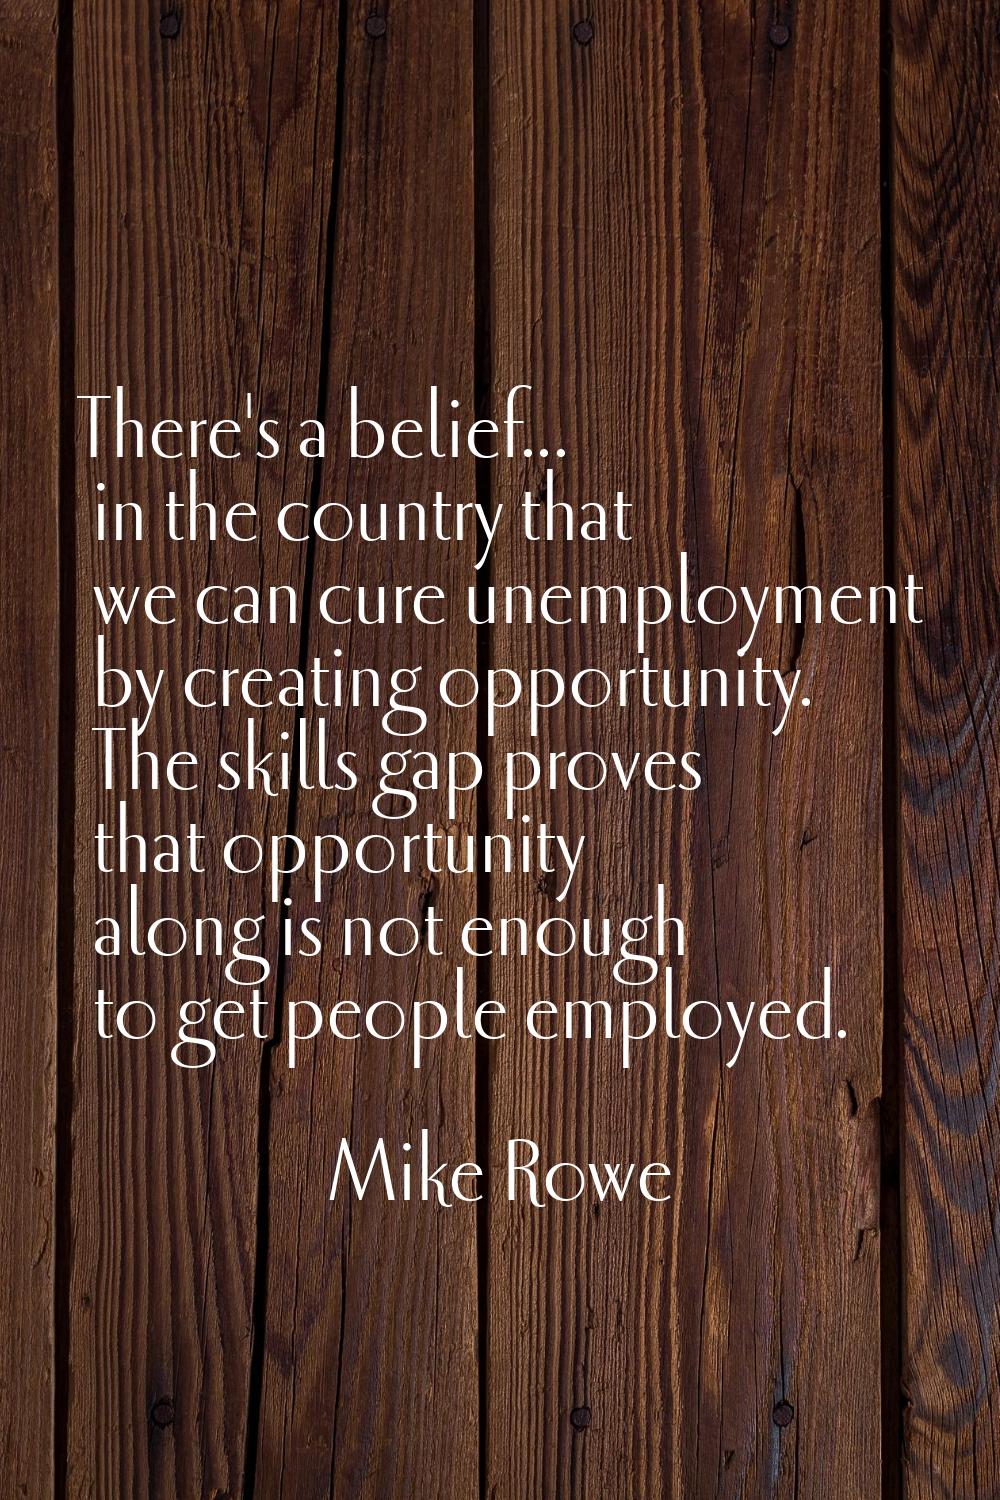 There's a belief... in the country that we can cure unemployment by creating opportunity. The skill